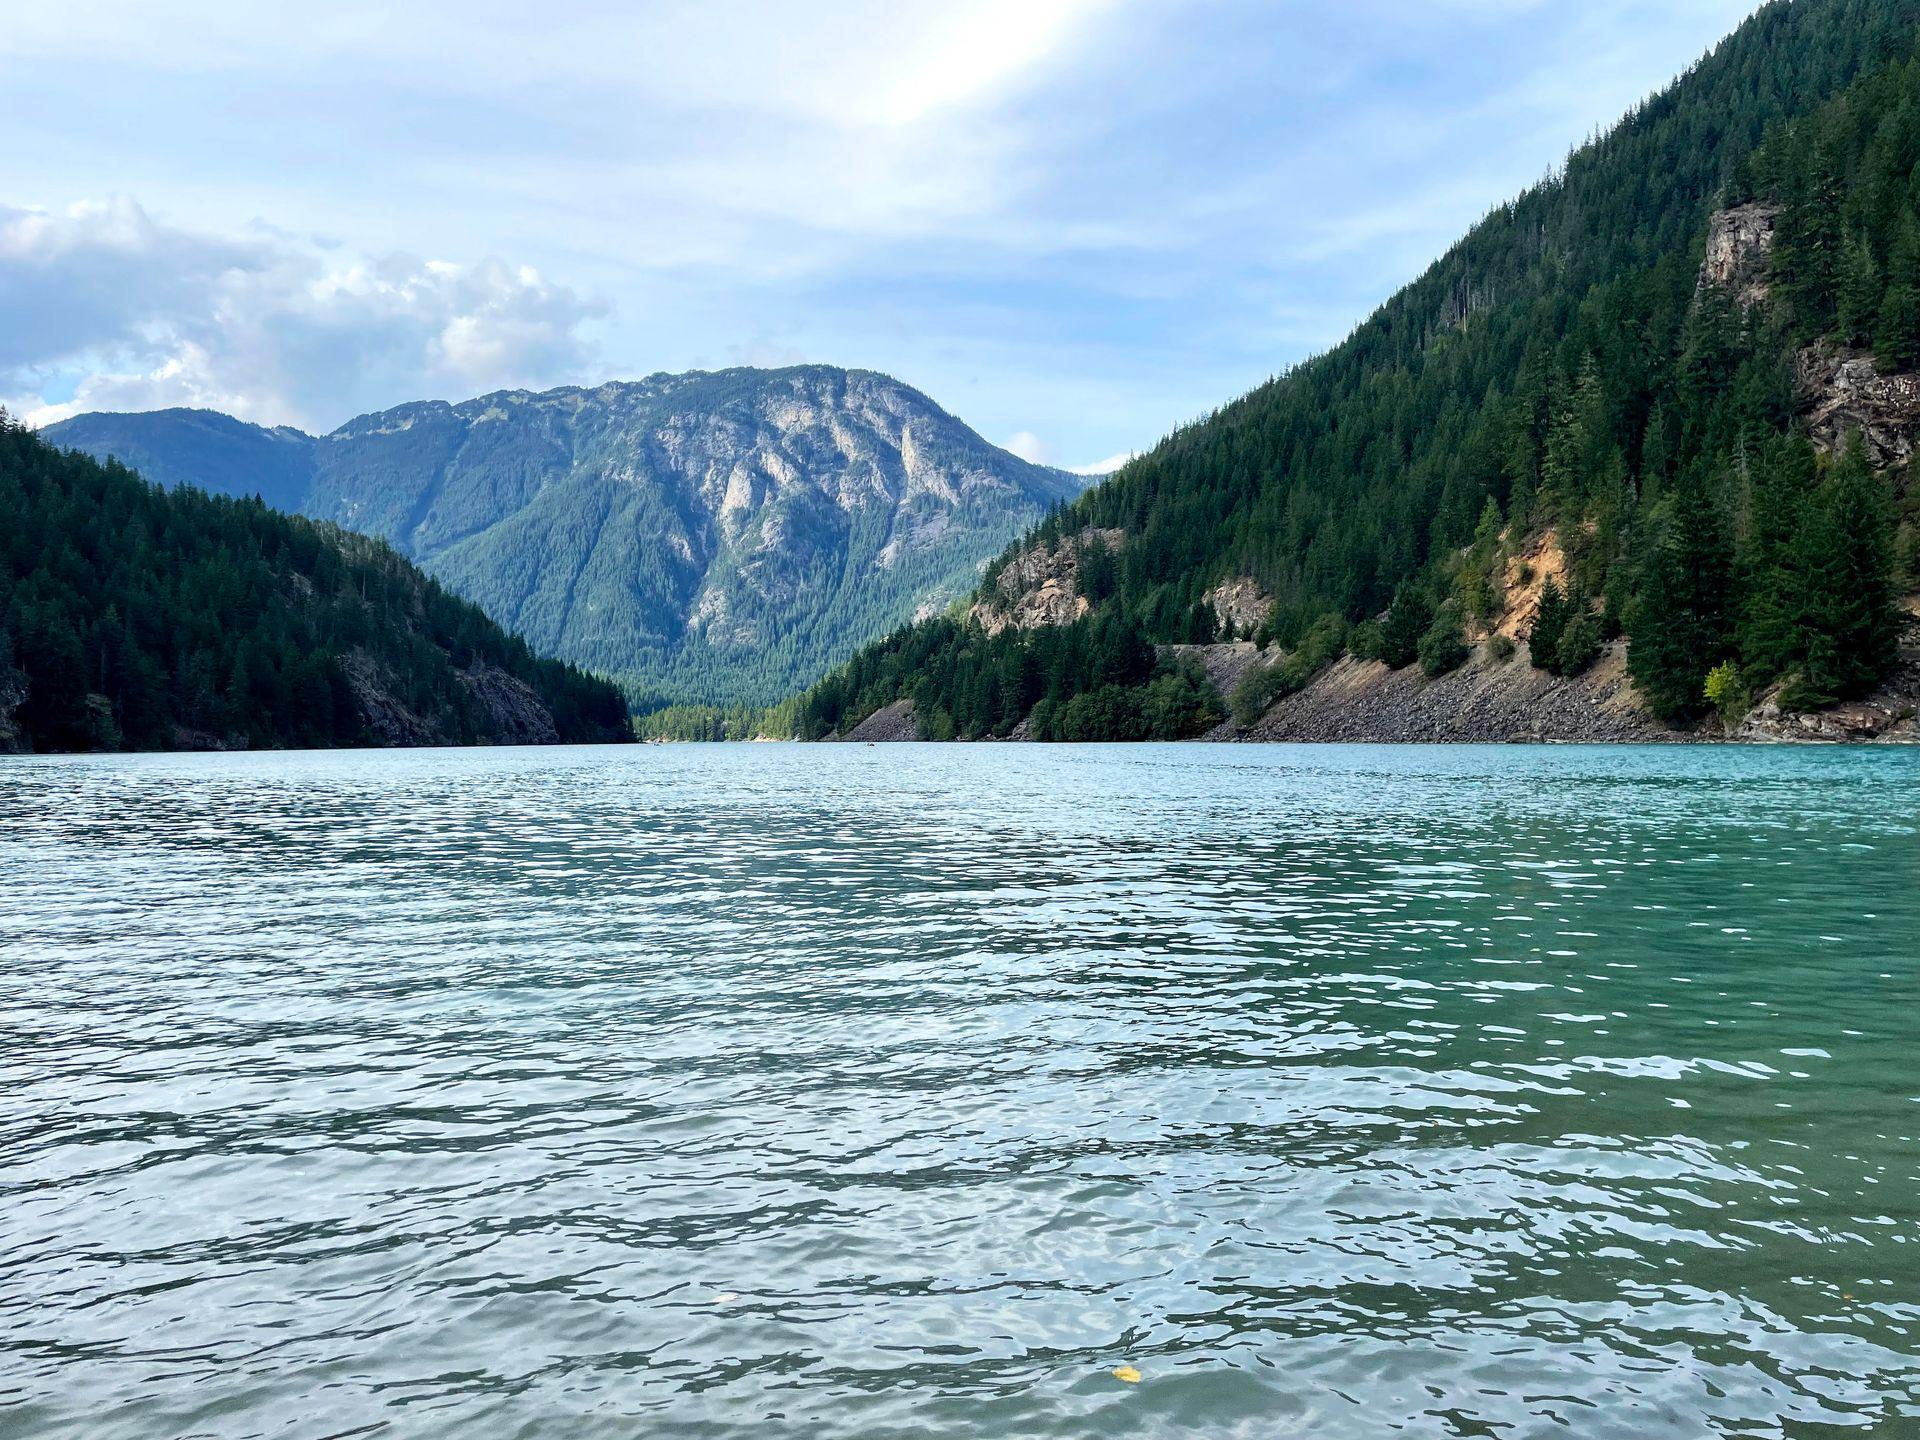 A close up view of the green water in Diablo Lake.